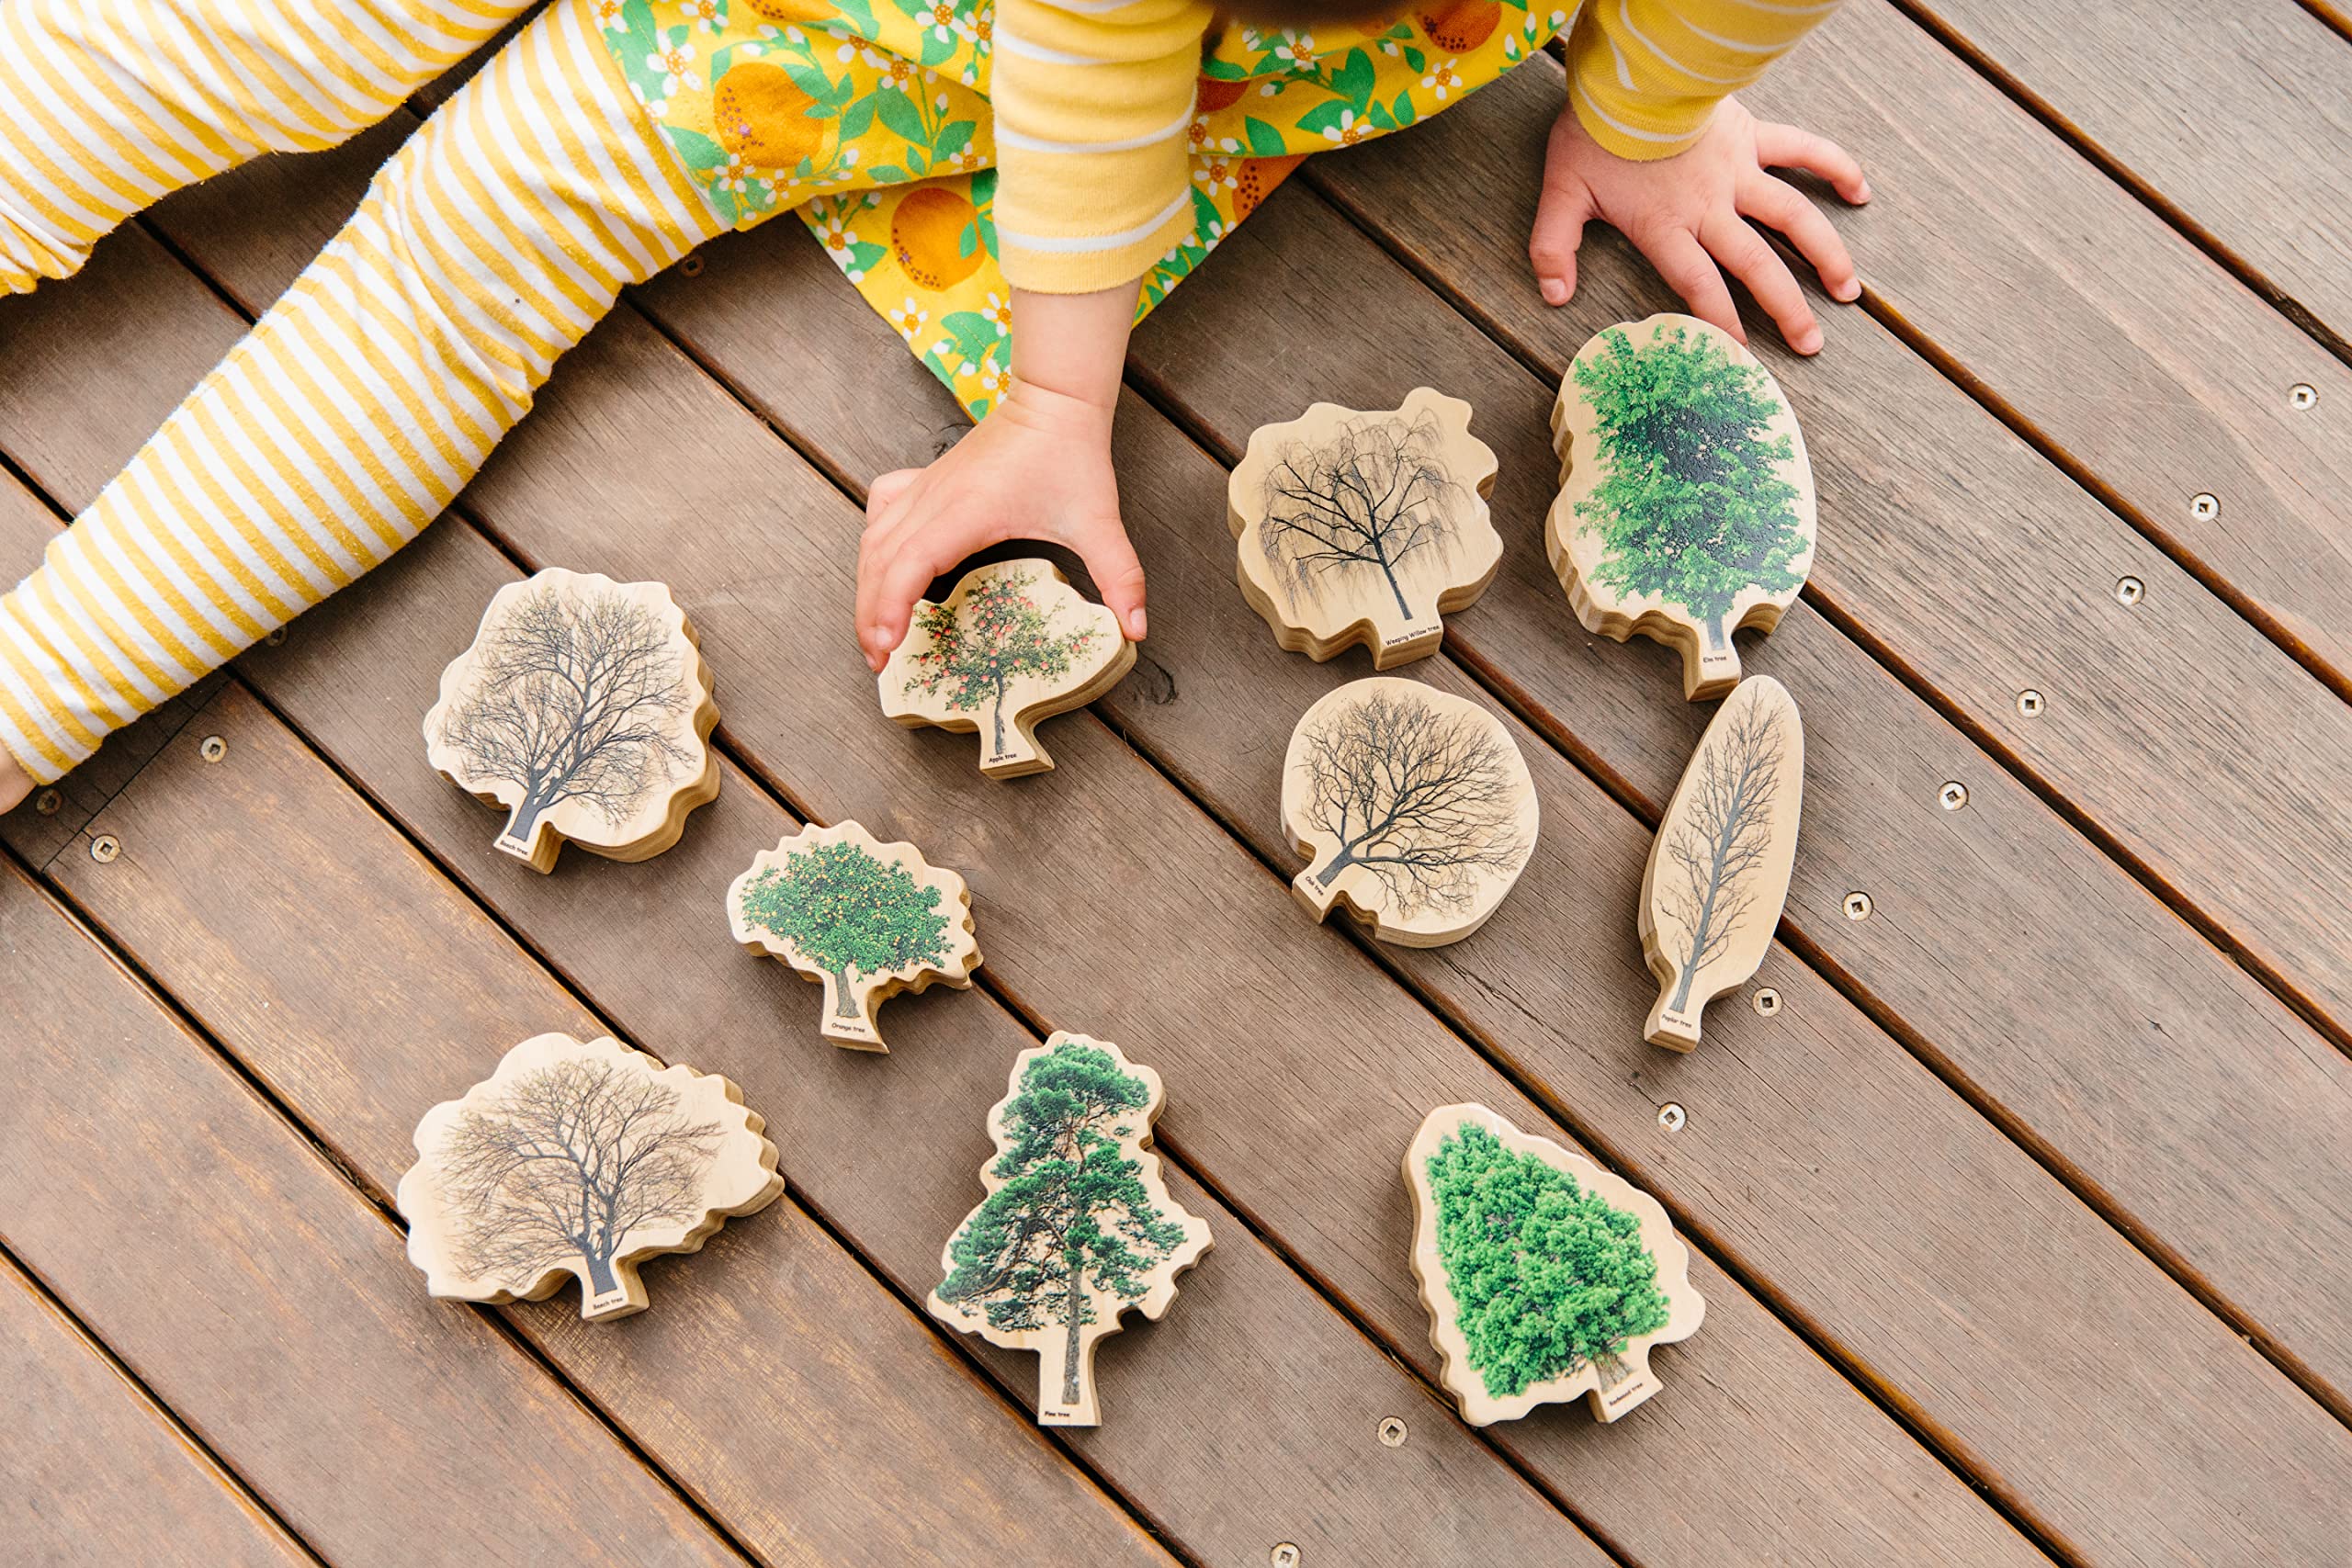 THE FRECKLED FROG Seasons - Set of 10 - Ages 18m+ - Wooden Tree Blocks - Double-Sided - Real Photographs - Trees in Winter, Summer, Autumn and Spring